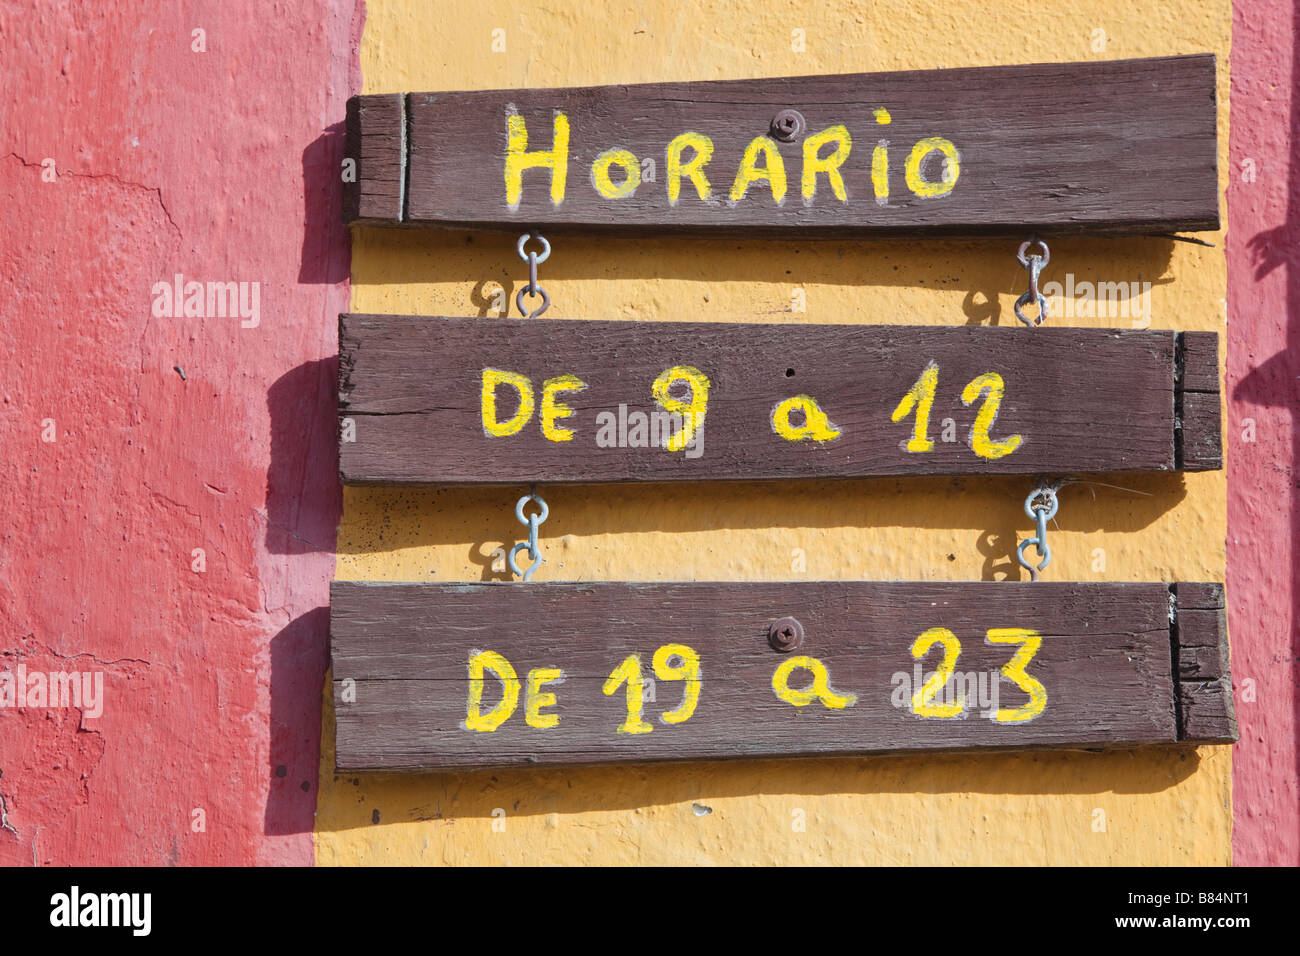 Horario or Opening Hours notice in the Spanish language outside a Spanish business Stock Photo